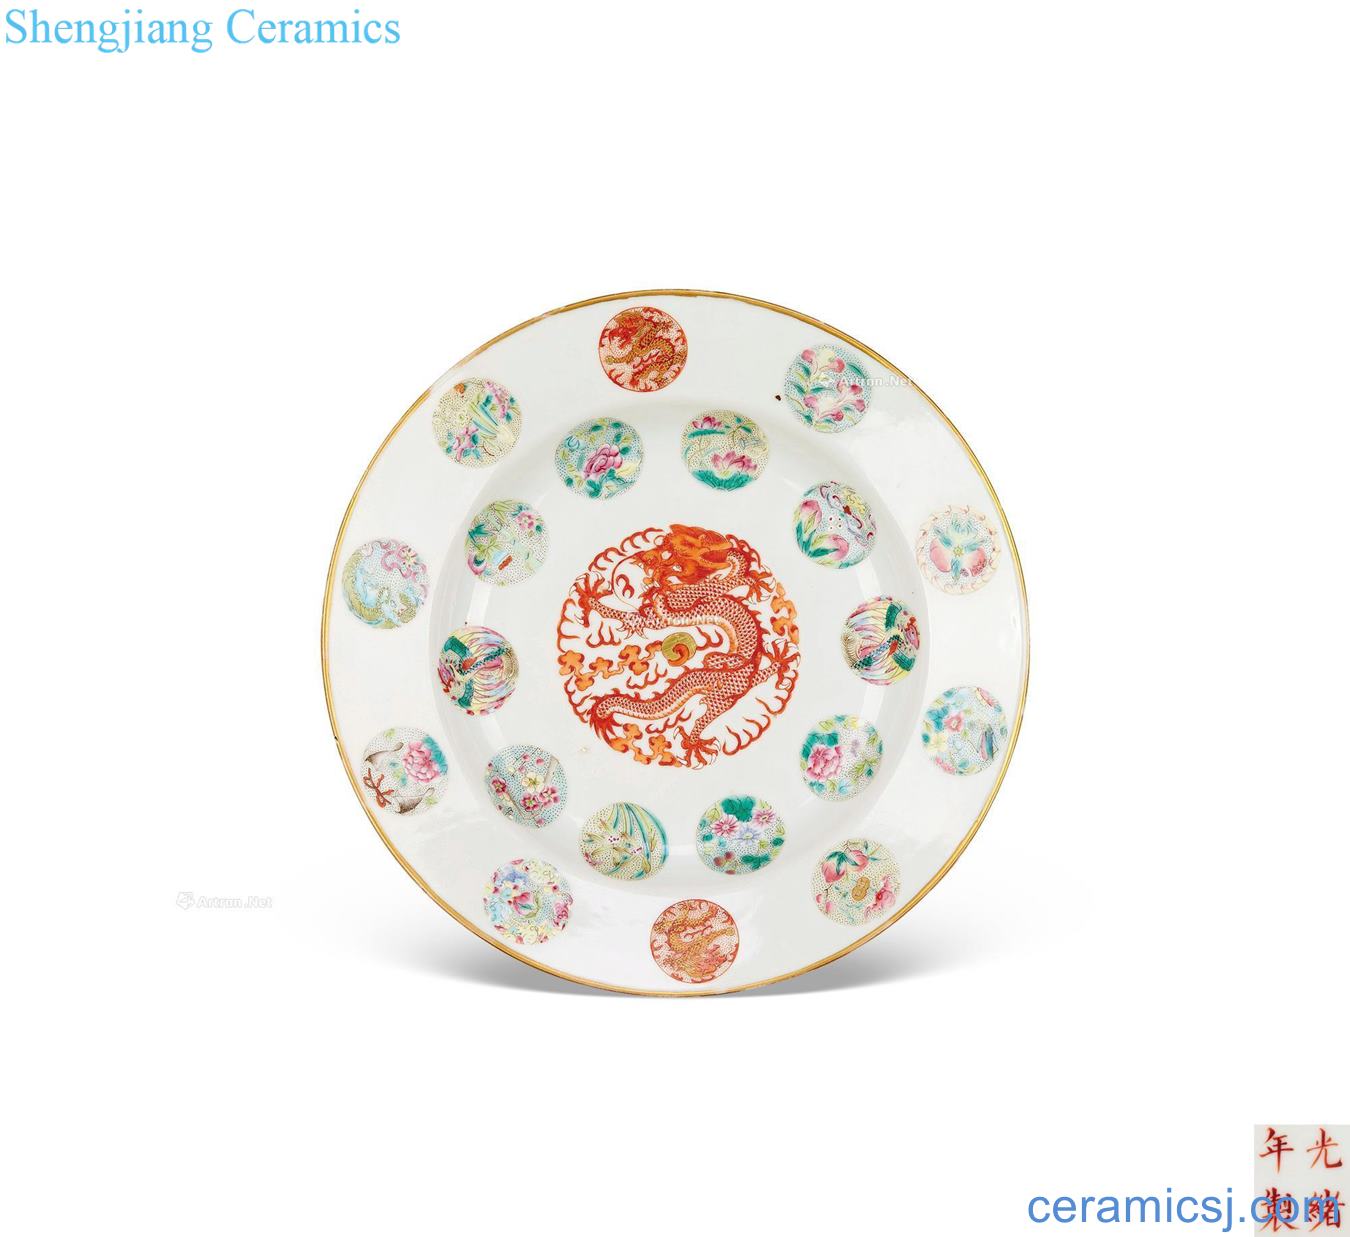 Pastel reign of qing emperor guangxu group dragon pattern plate